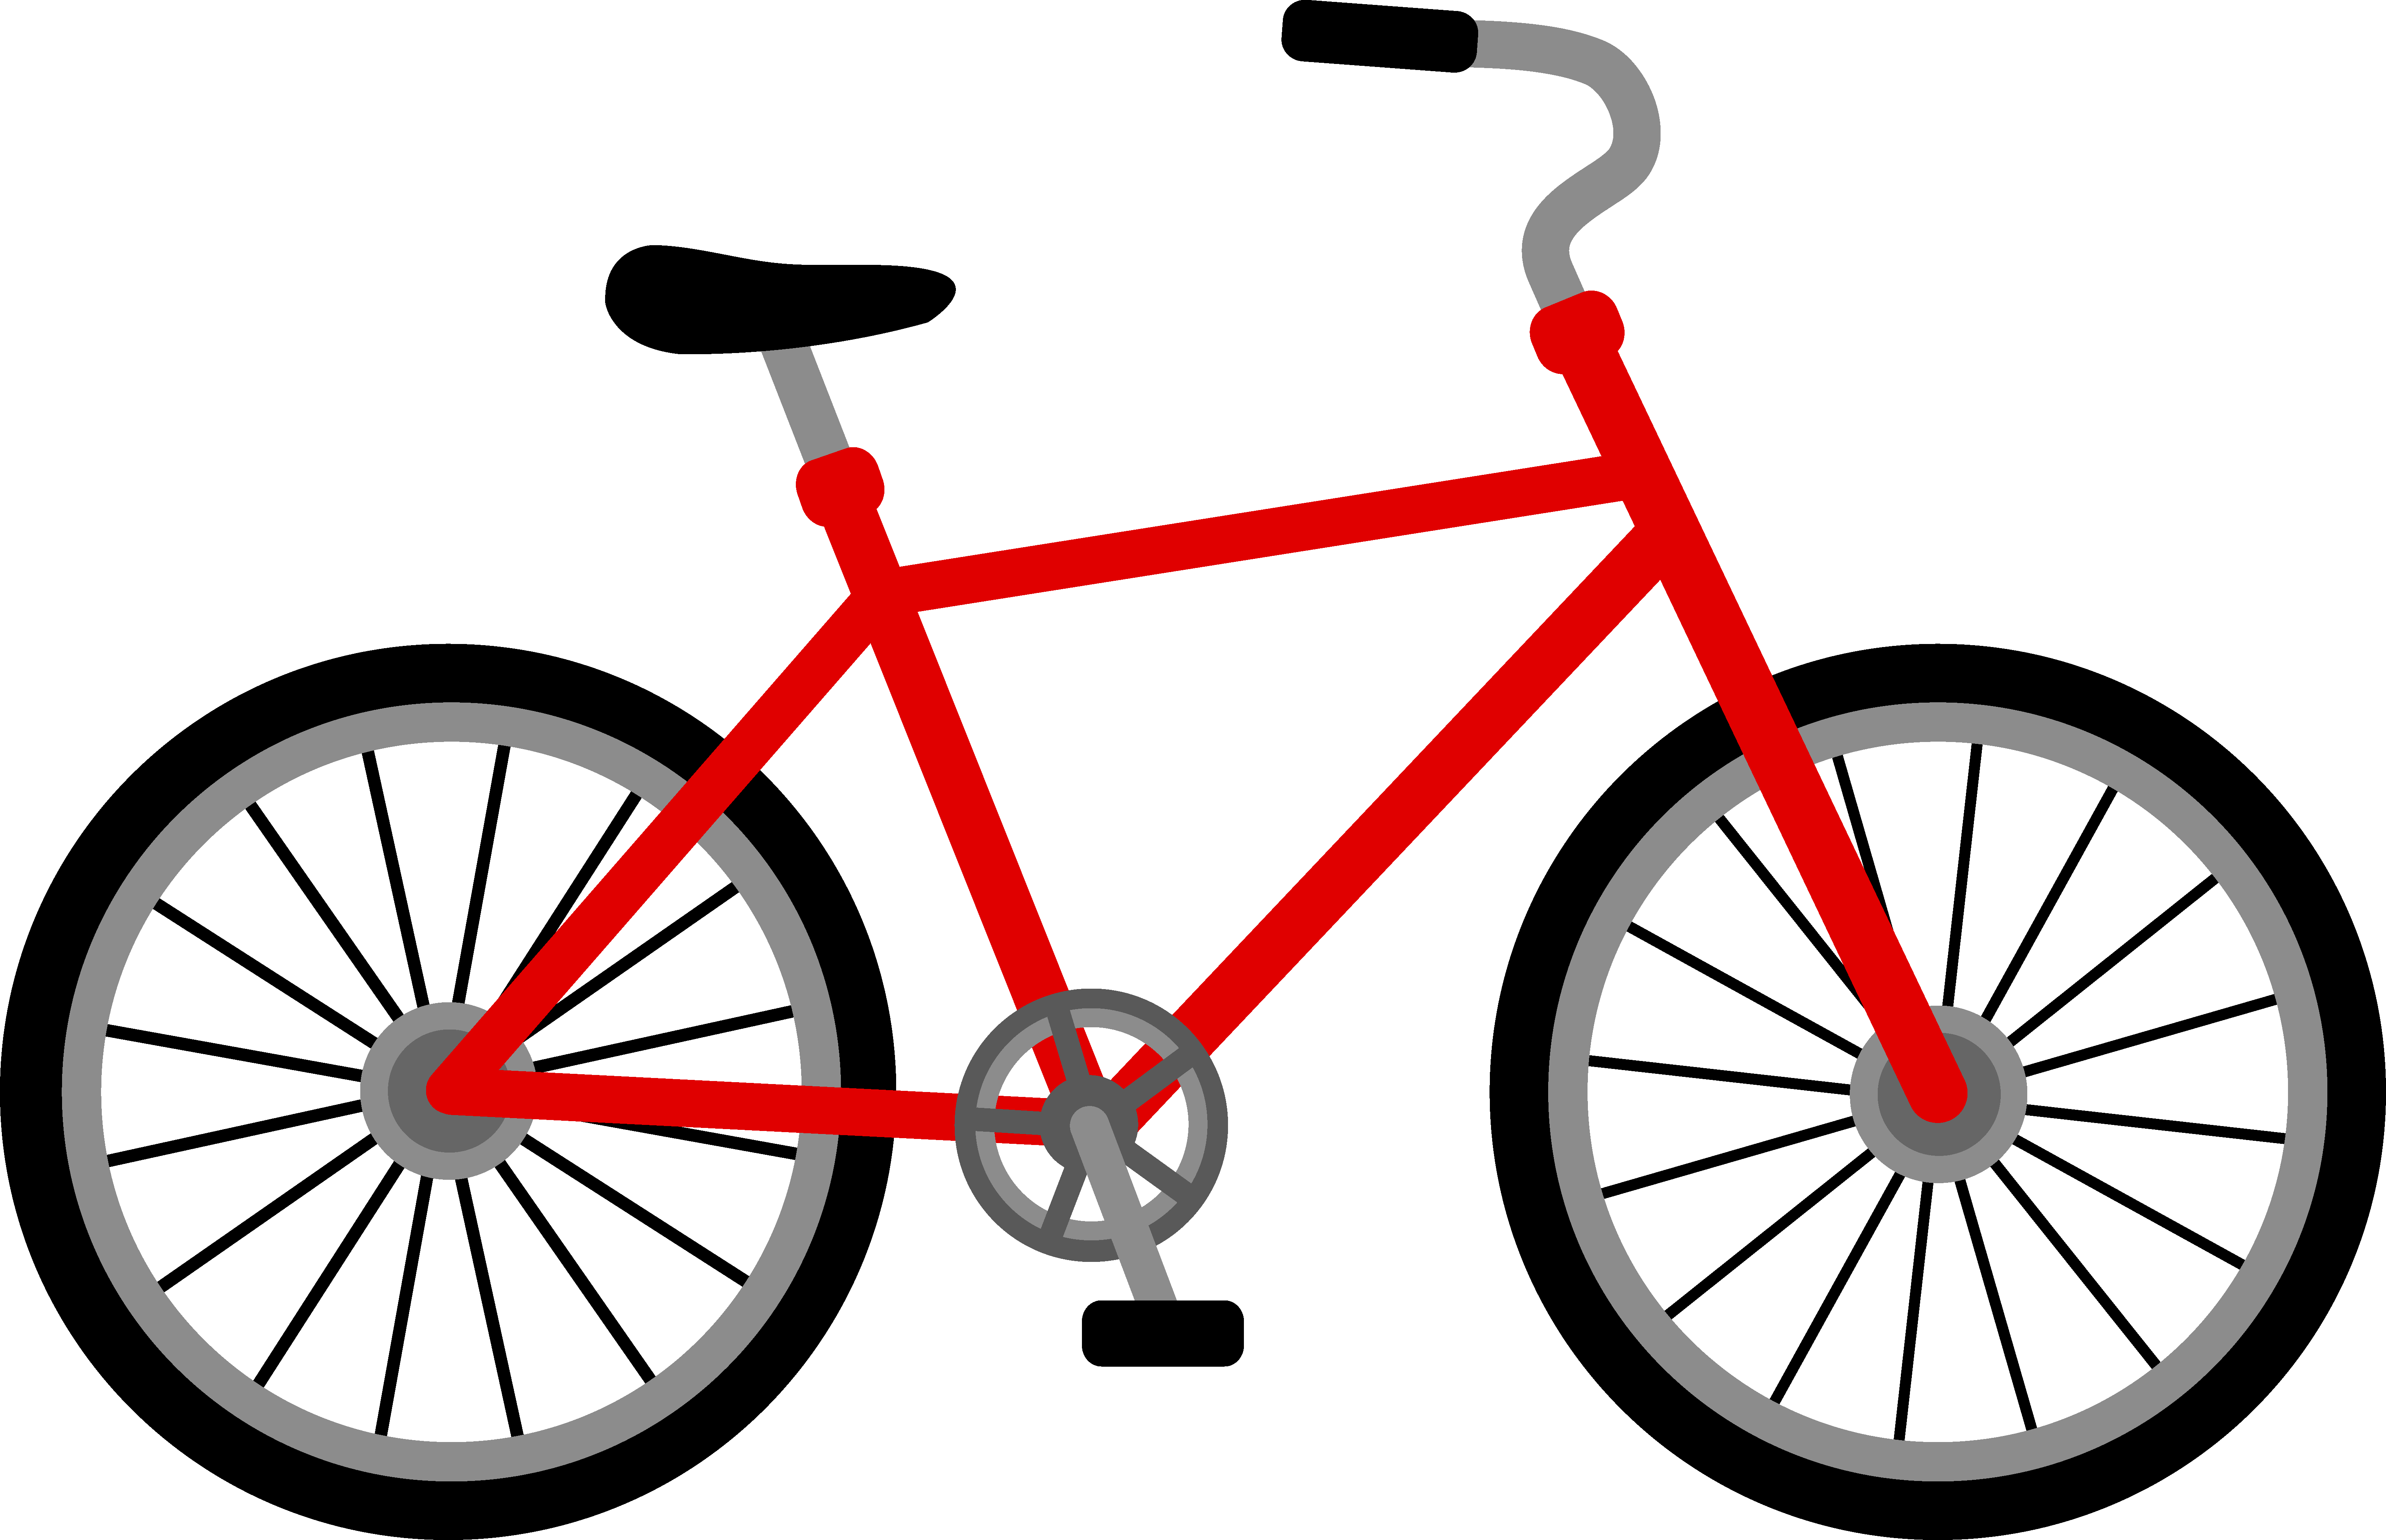 Cycle clipart baby. Bicycle panda free images